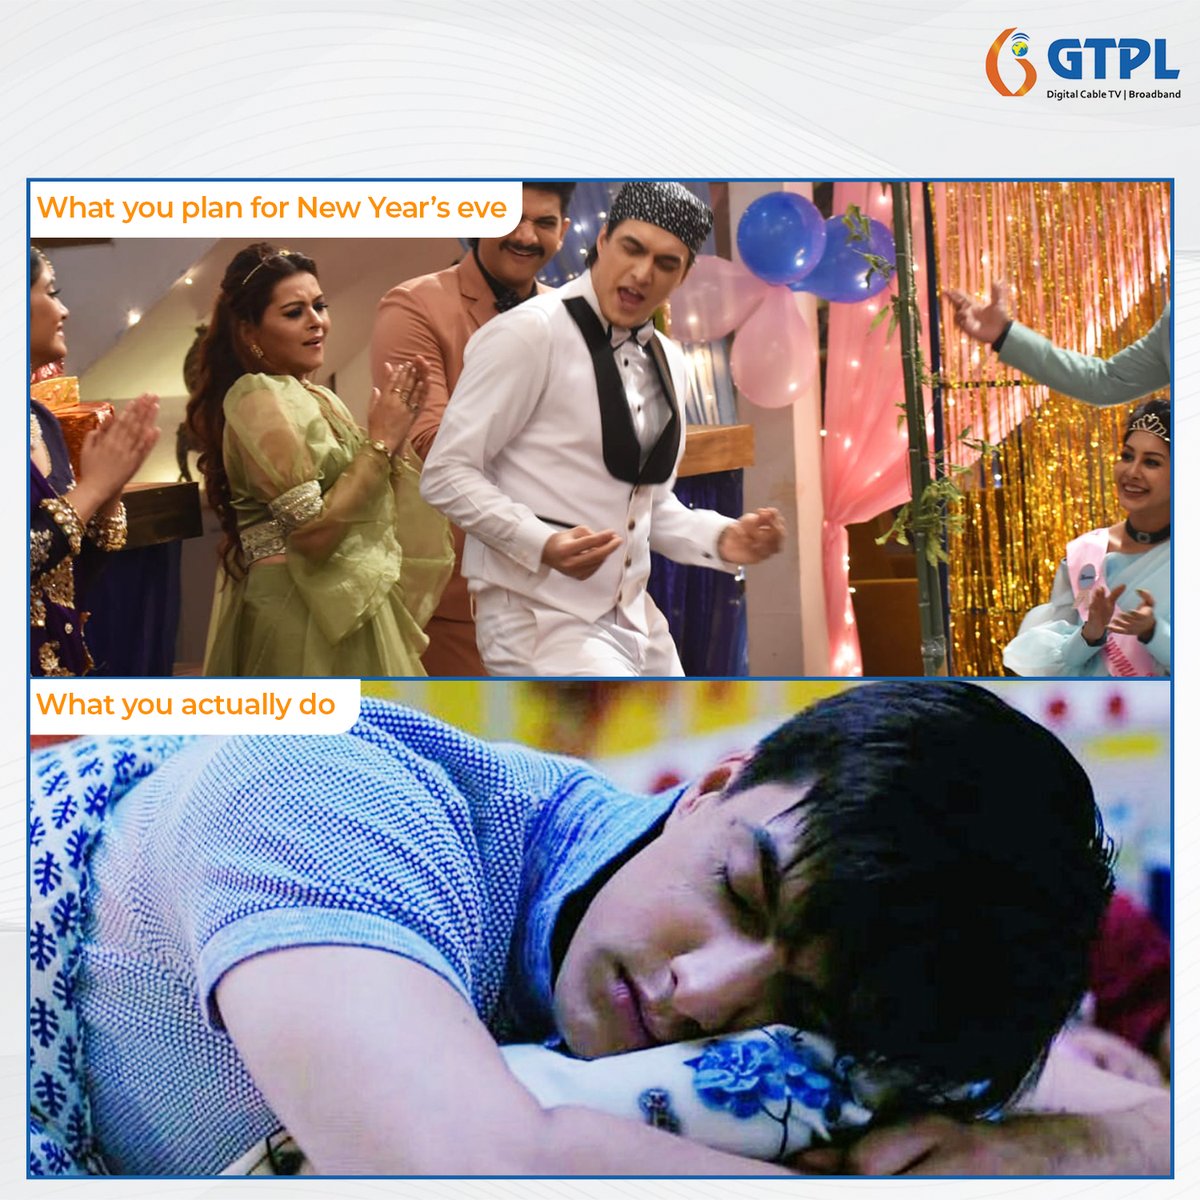 Nothing like a satisfying sleep transition into the new year.
Is it too early to make New Year's plans? Share your thoughts below.​

#GTPL #ConnectionDilSe #MohsinKhan #NewYear #NewYearPlans #Meme #ExpectationsVsReality